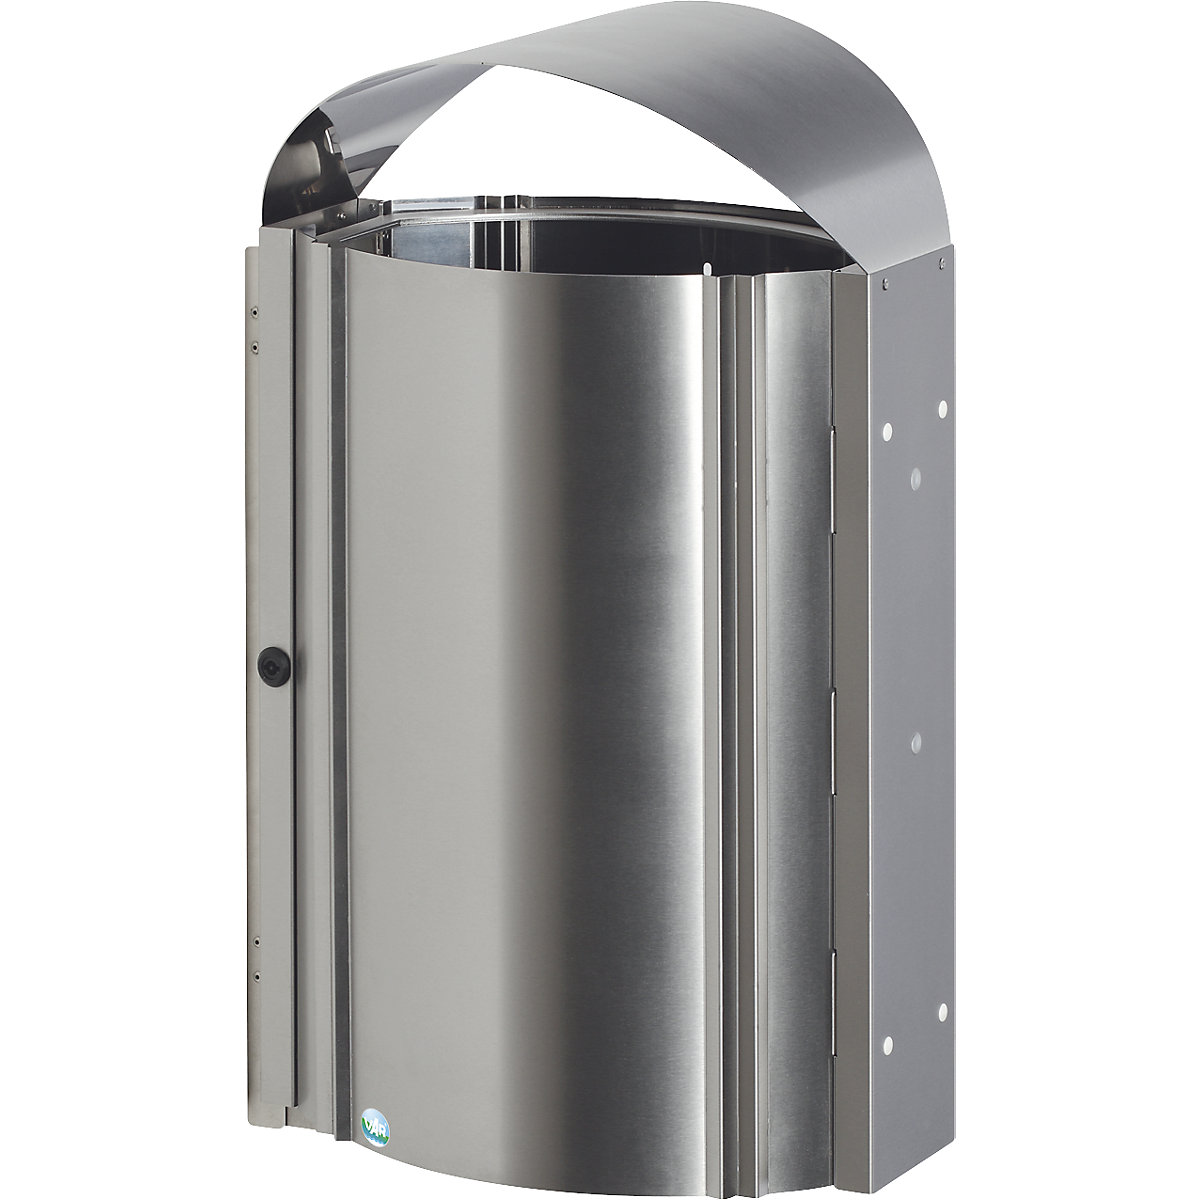 Stainless steel waste collector, outdoor areas – VAR